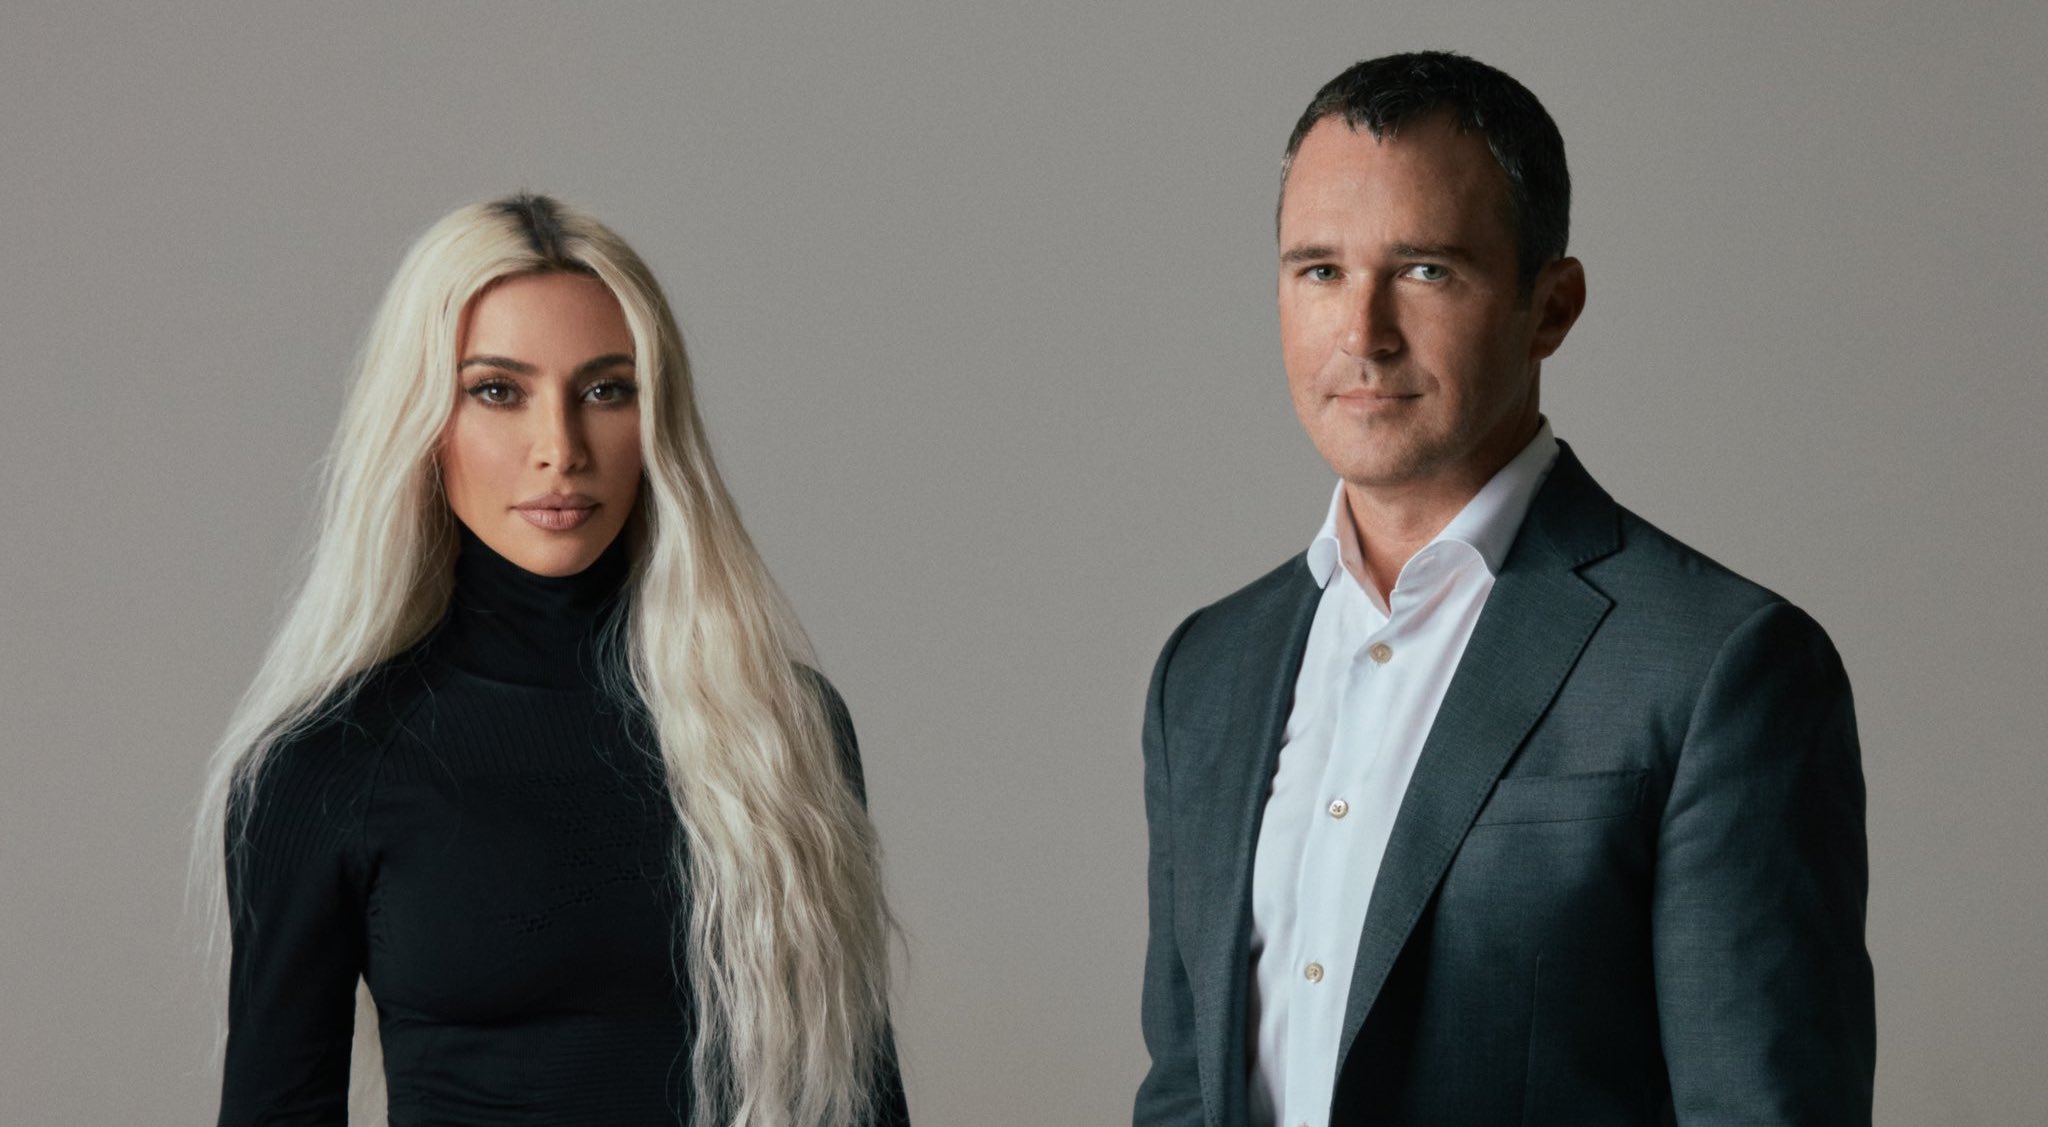 Kim Kardashian launches media-focused private equity firm - Digital TV Europe